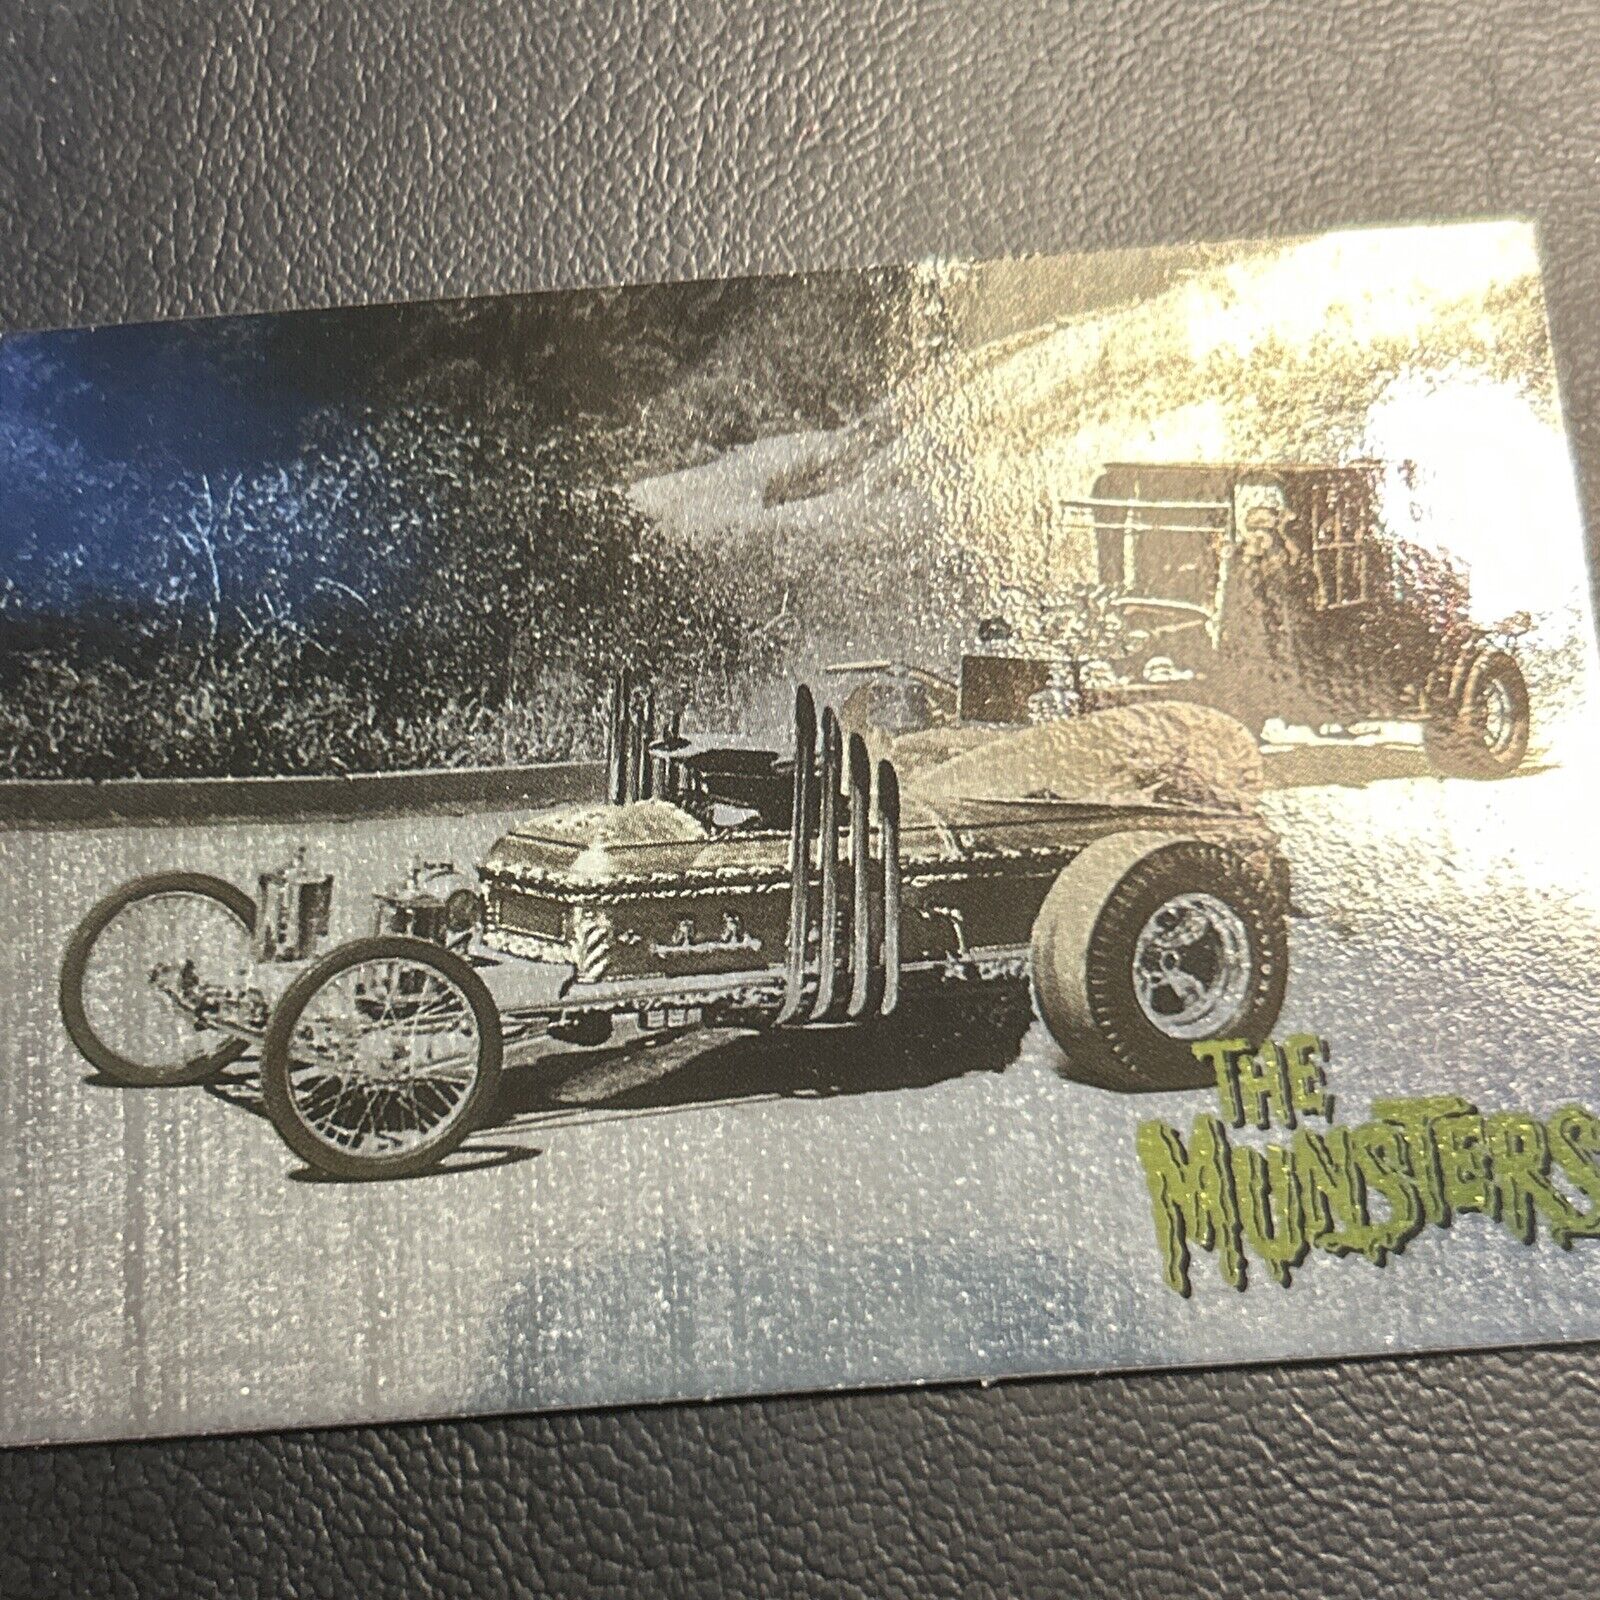 Jb3c The Munsters Deluxe Collection 1996 #28 George Barris Koach Drag U La